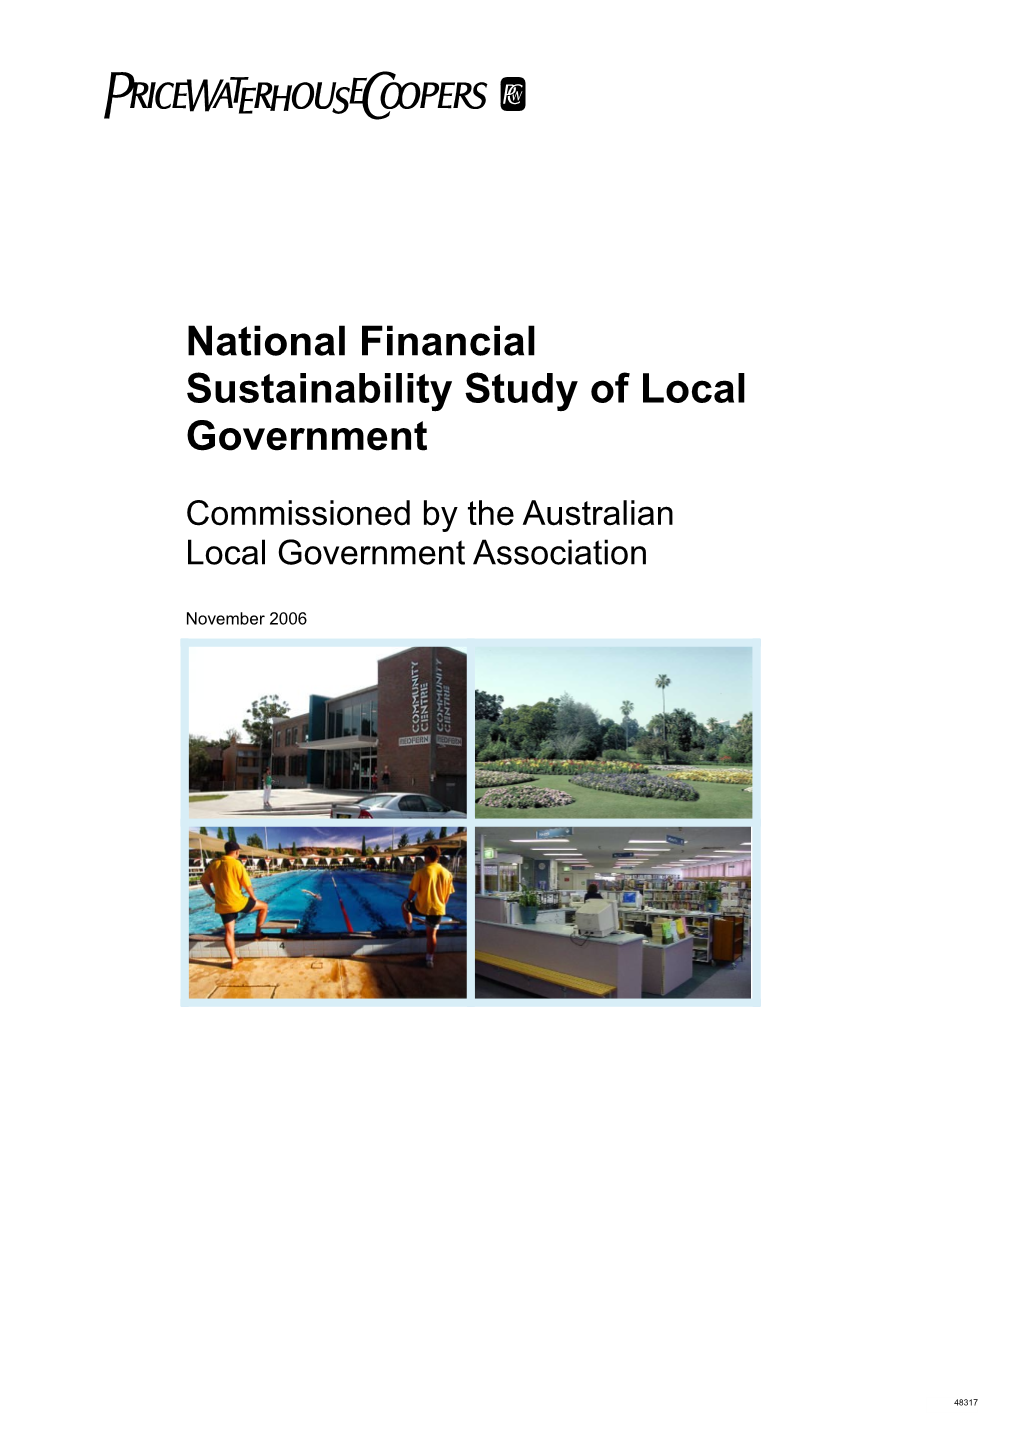 National Financial Sustainability Study of Local Government